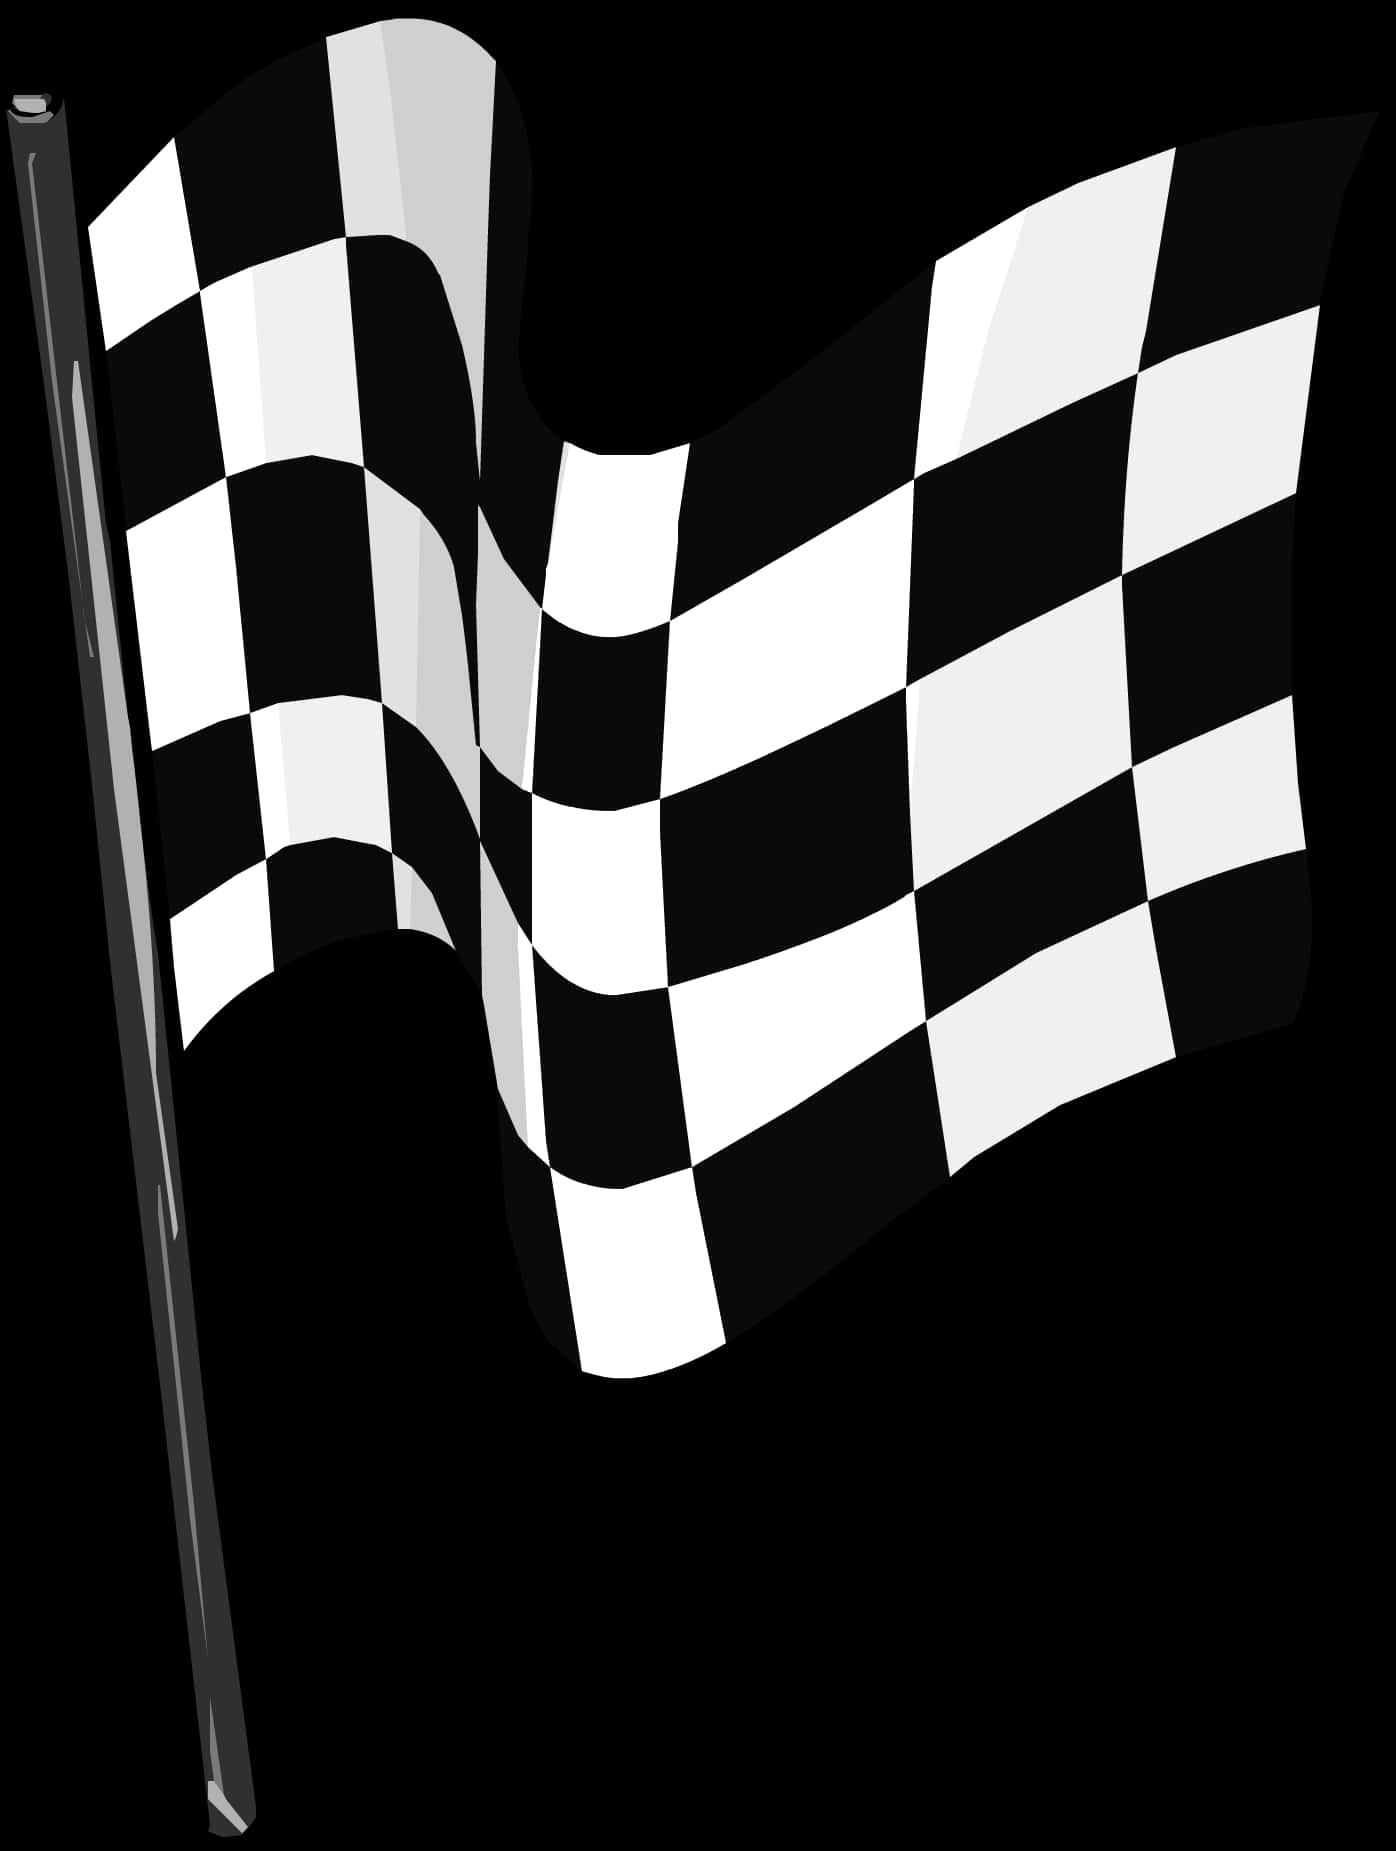 Checkered Racing Flag Graphic PNG